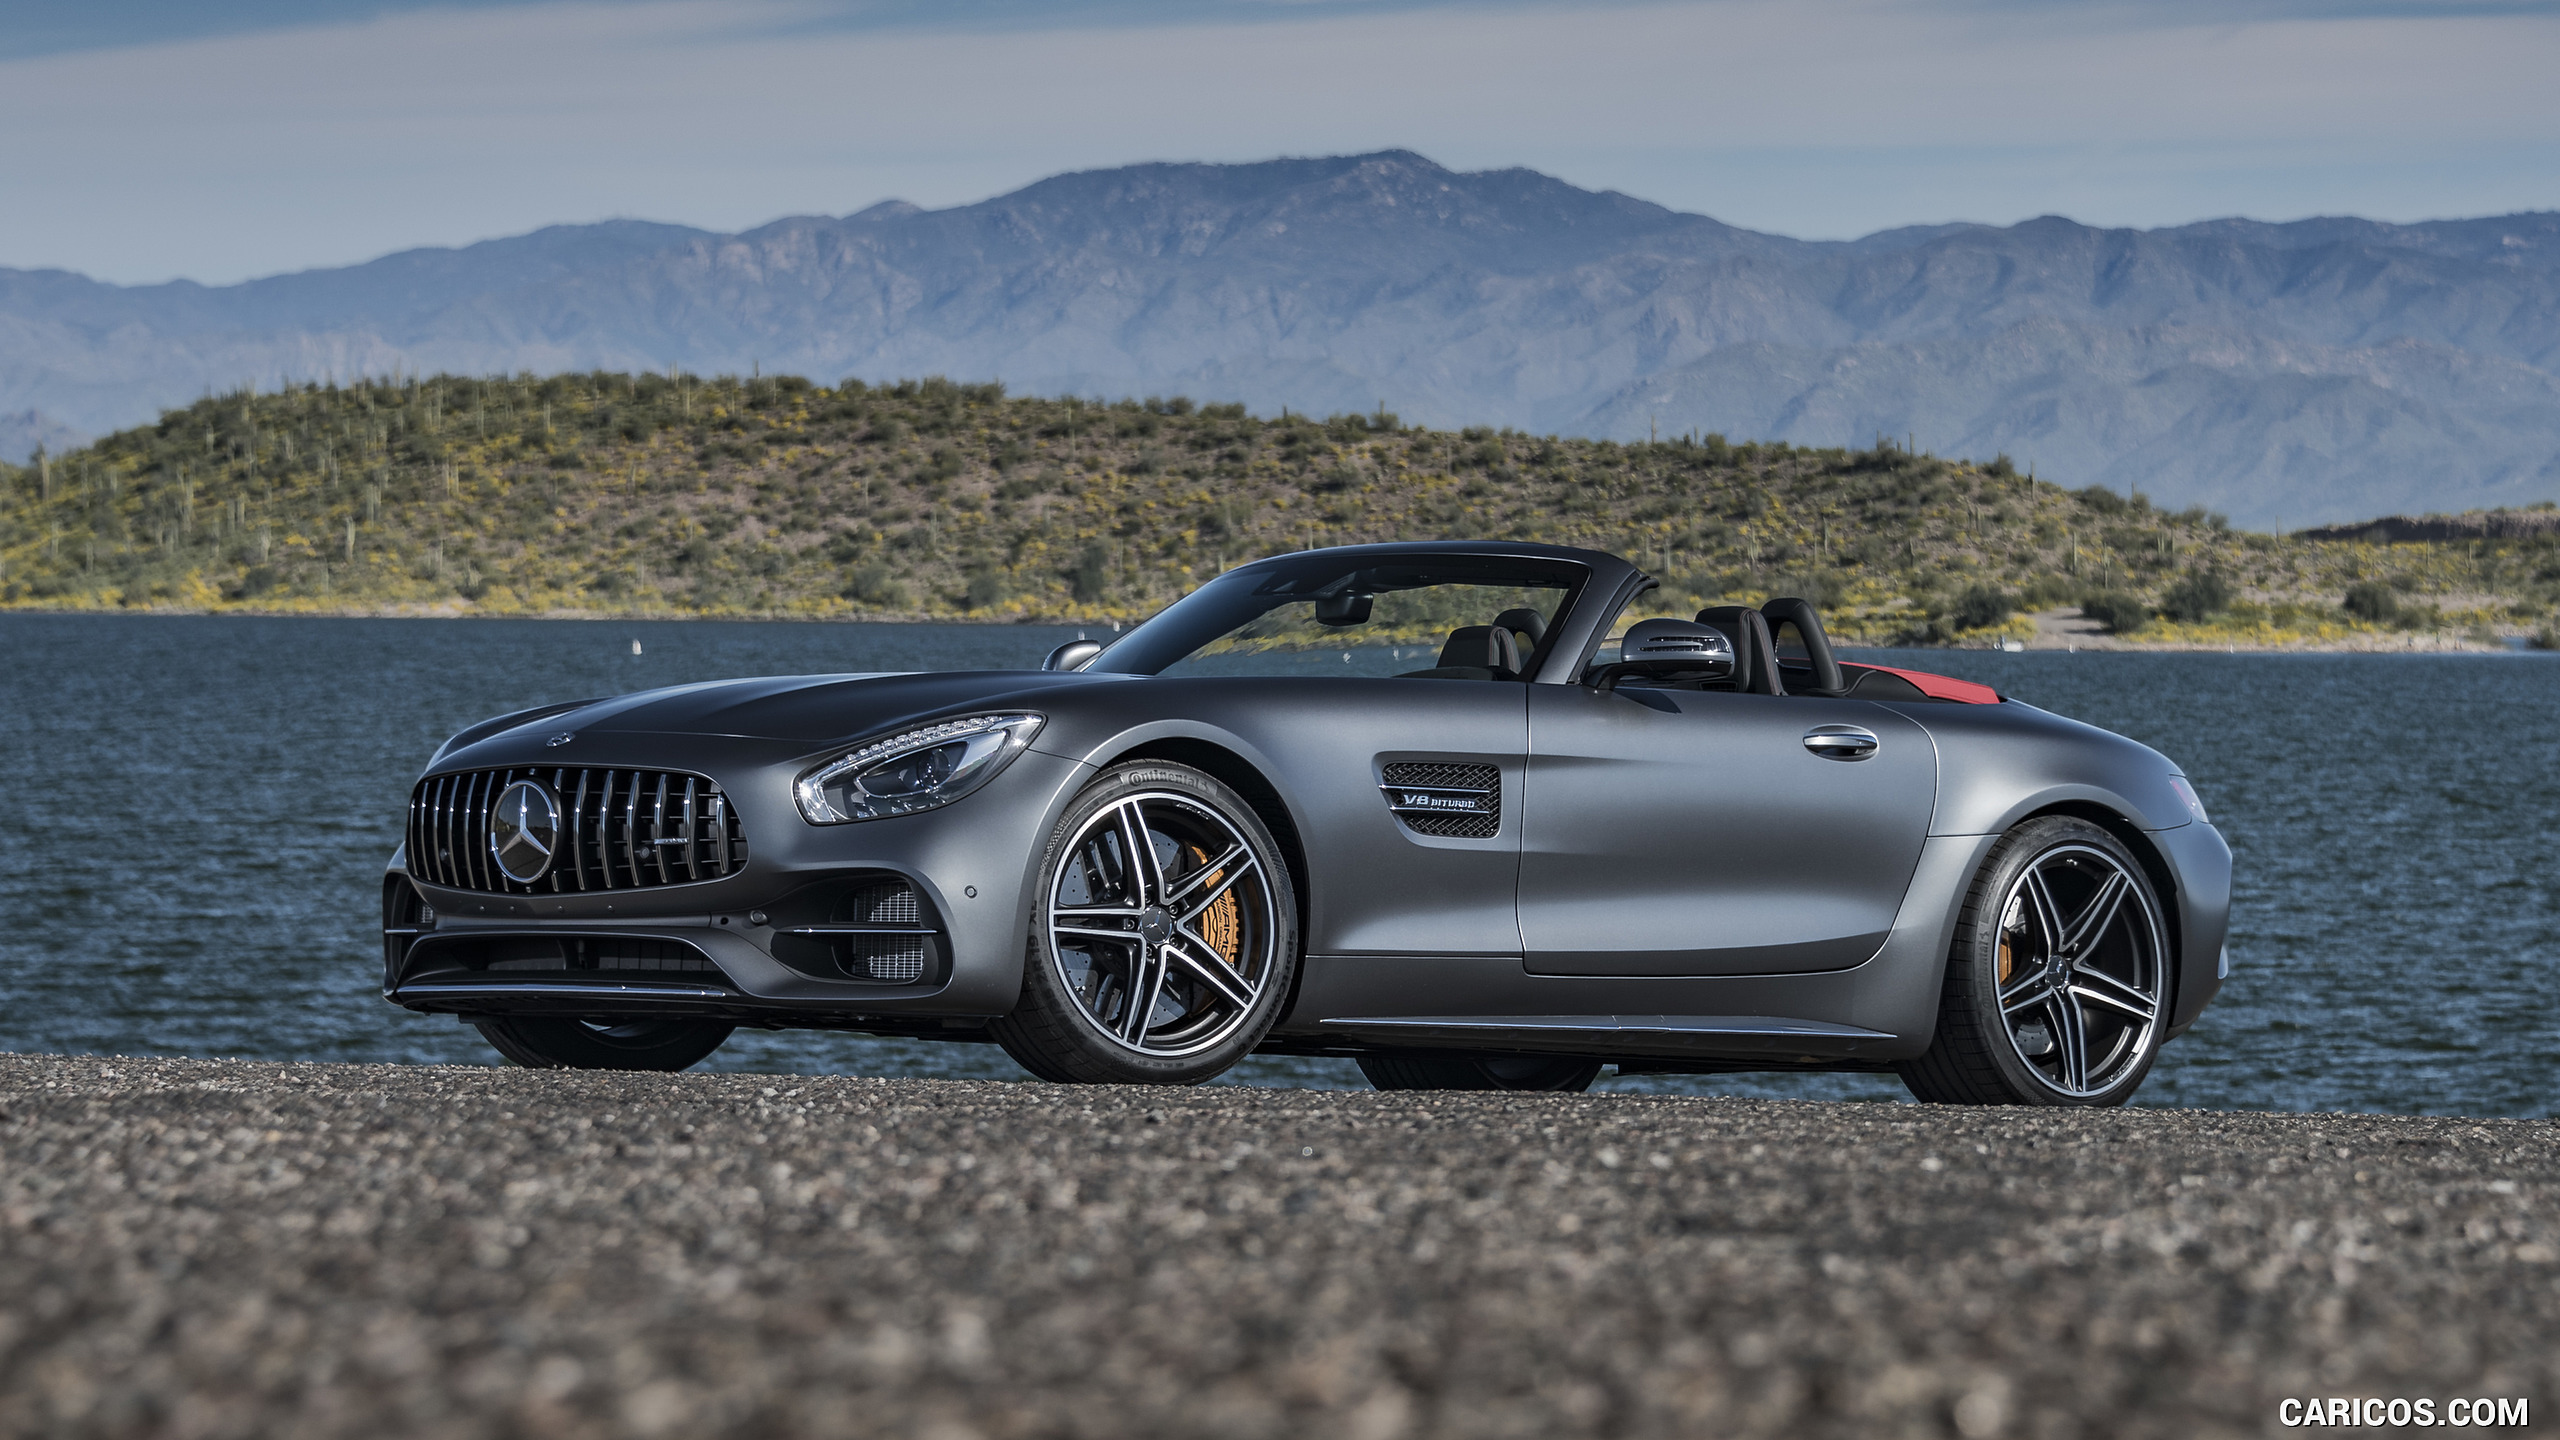 2018 Mercedes-AMG GT C Roadster - Front Three-Quarter, #305 of 350